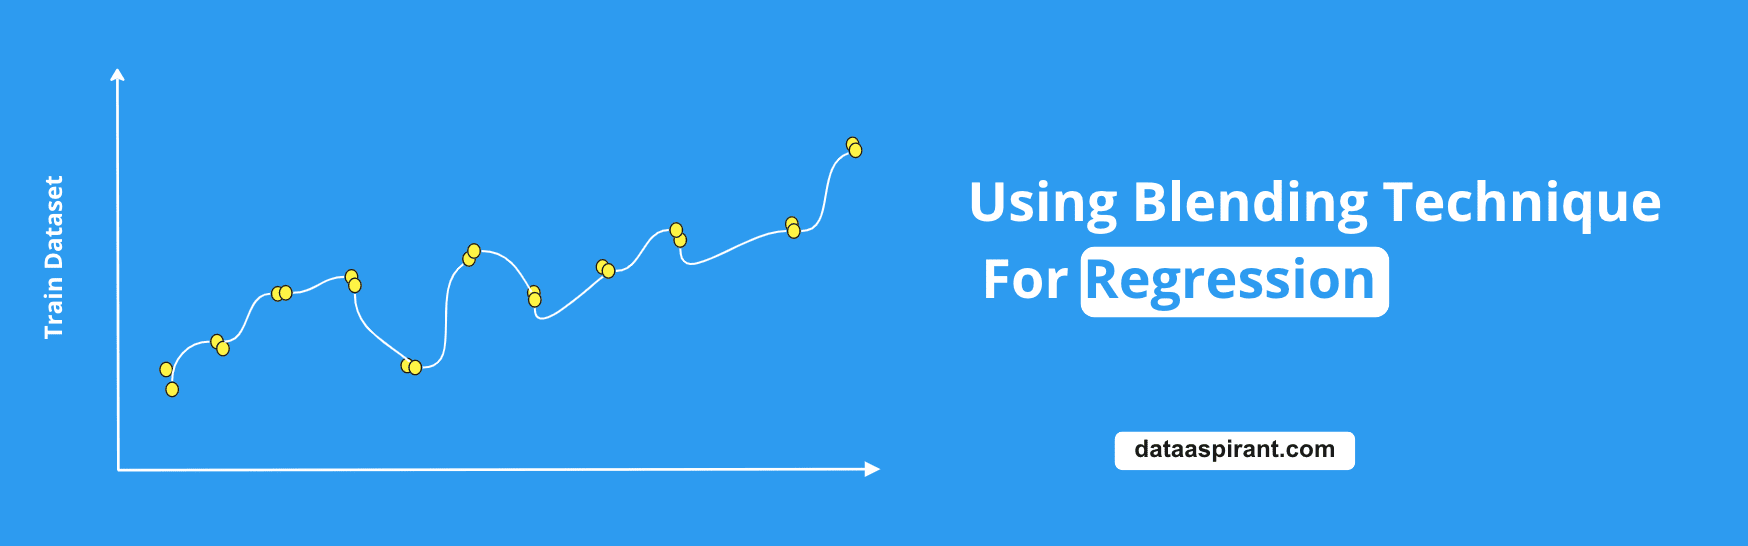 How to Use Blending Technique for Regression